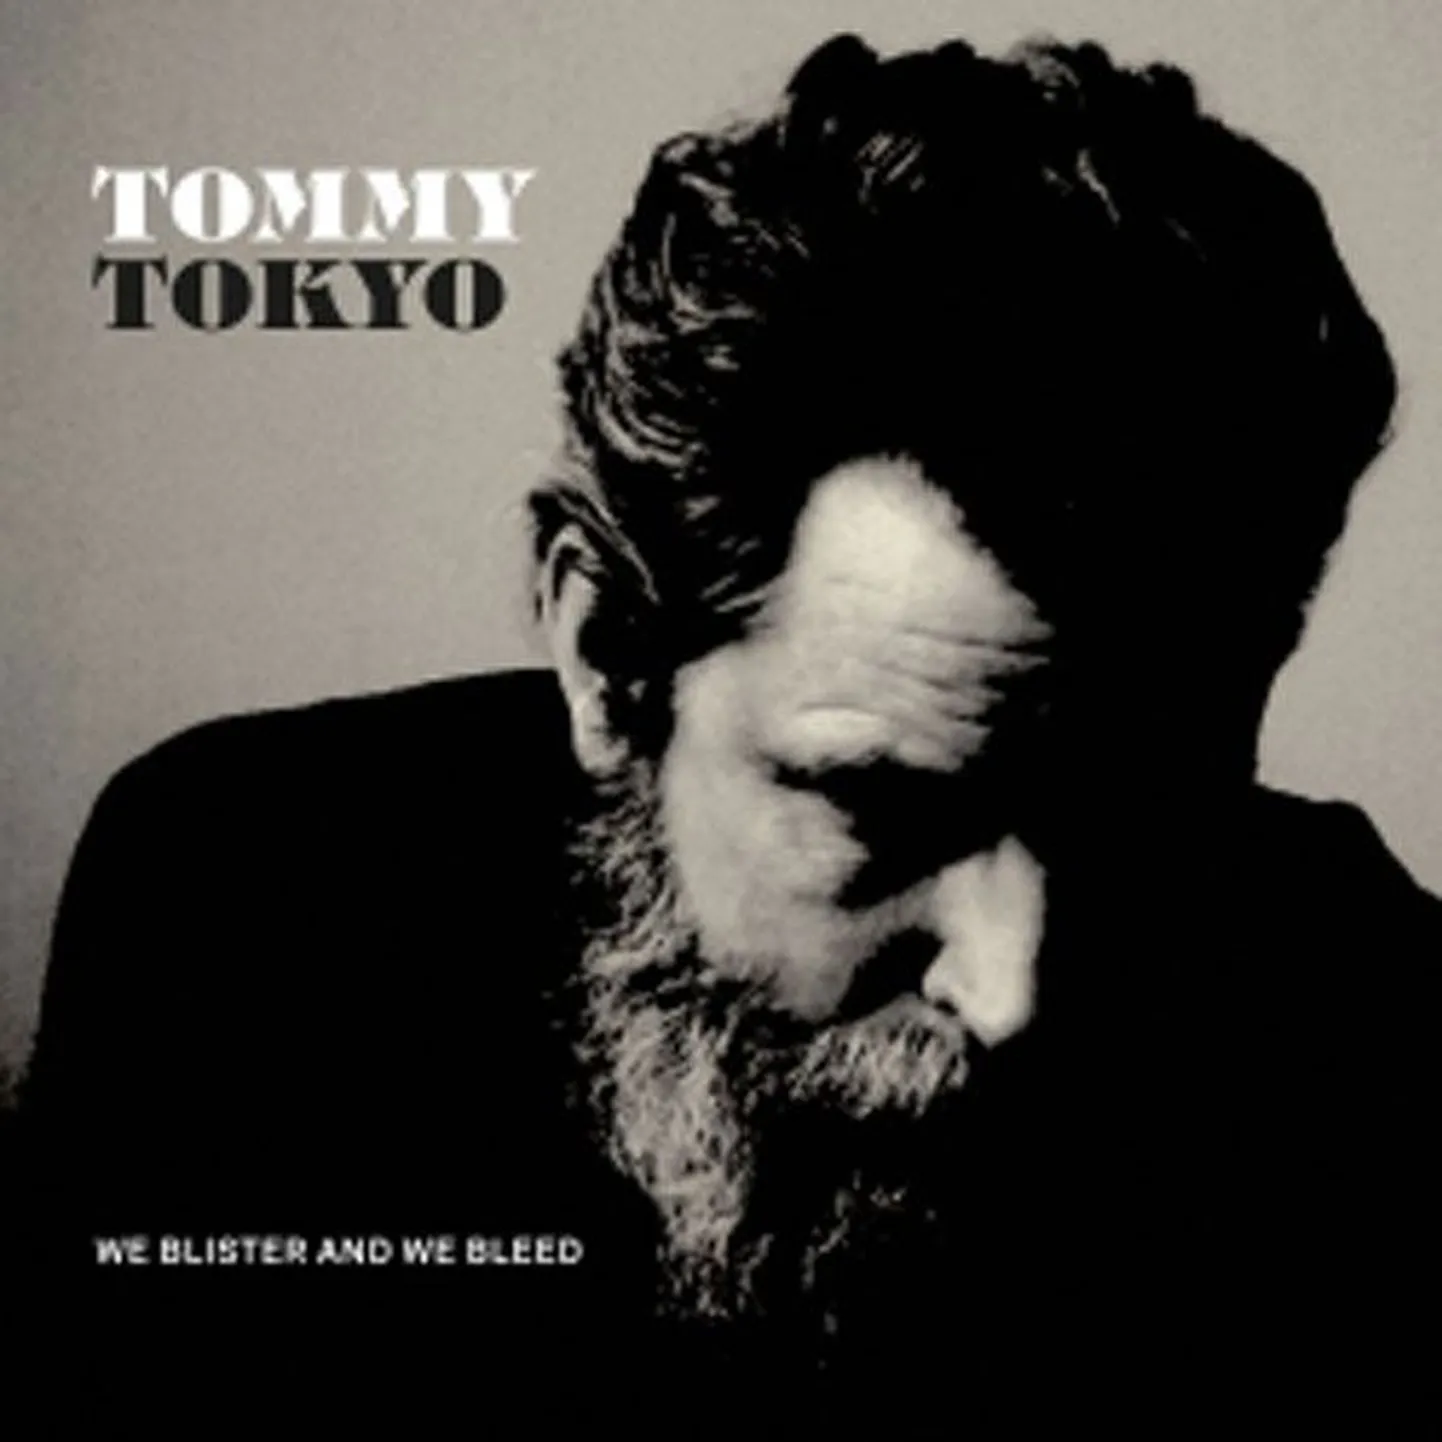 Tommy Tokyo
«We Blister And We Bleed» 
(Warner Music)